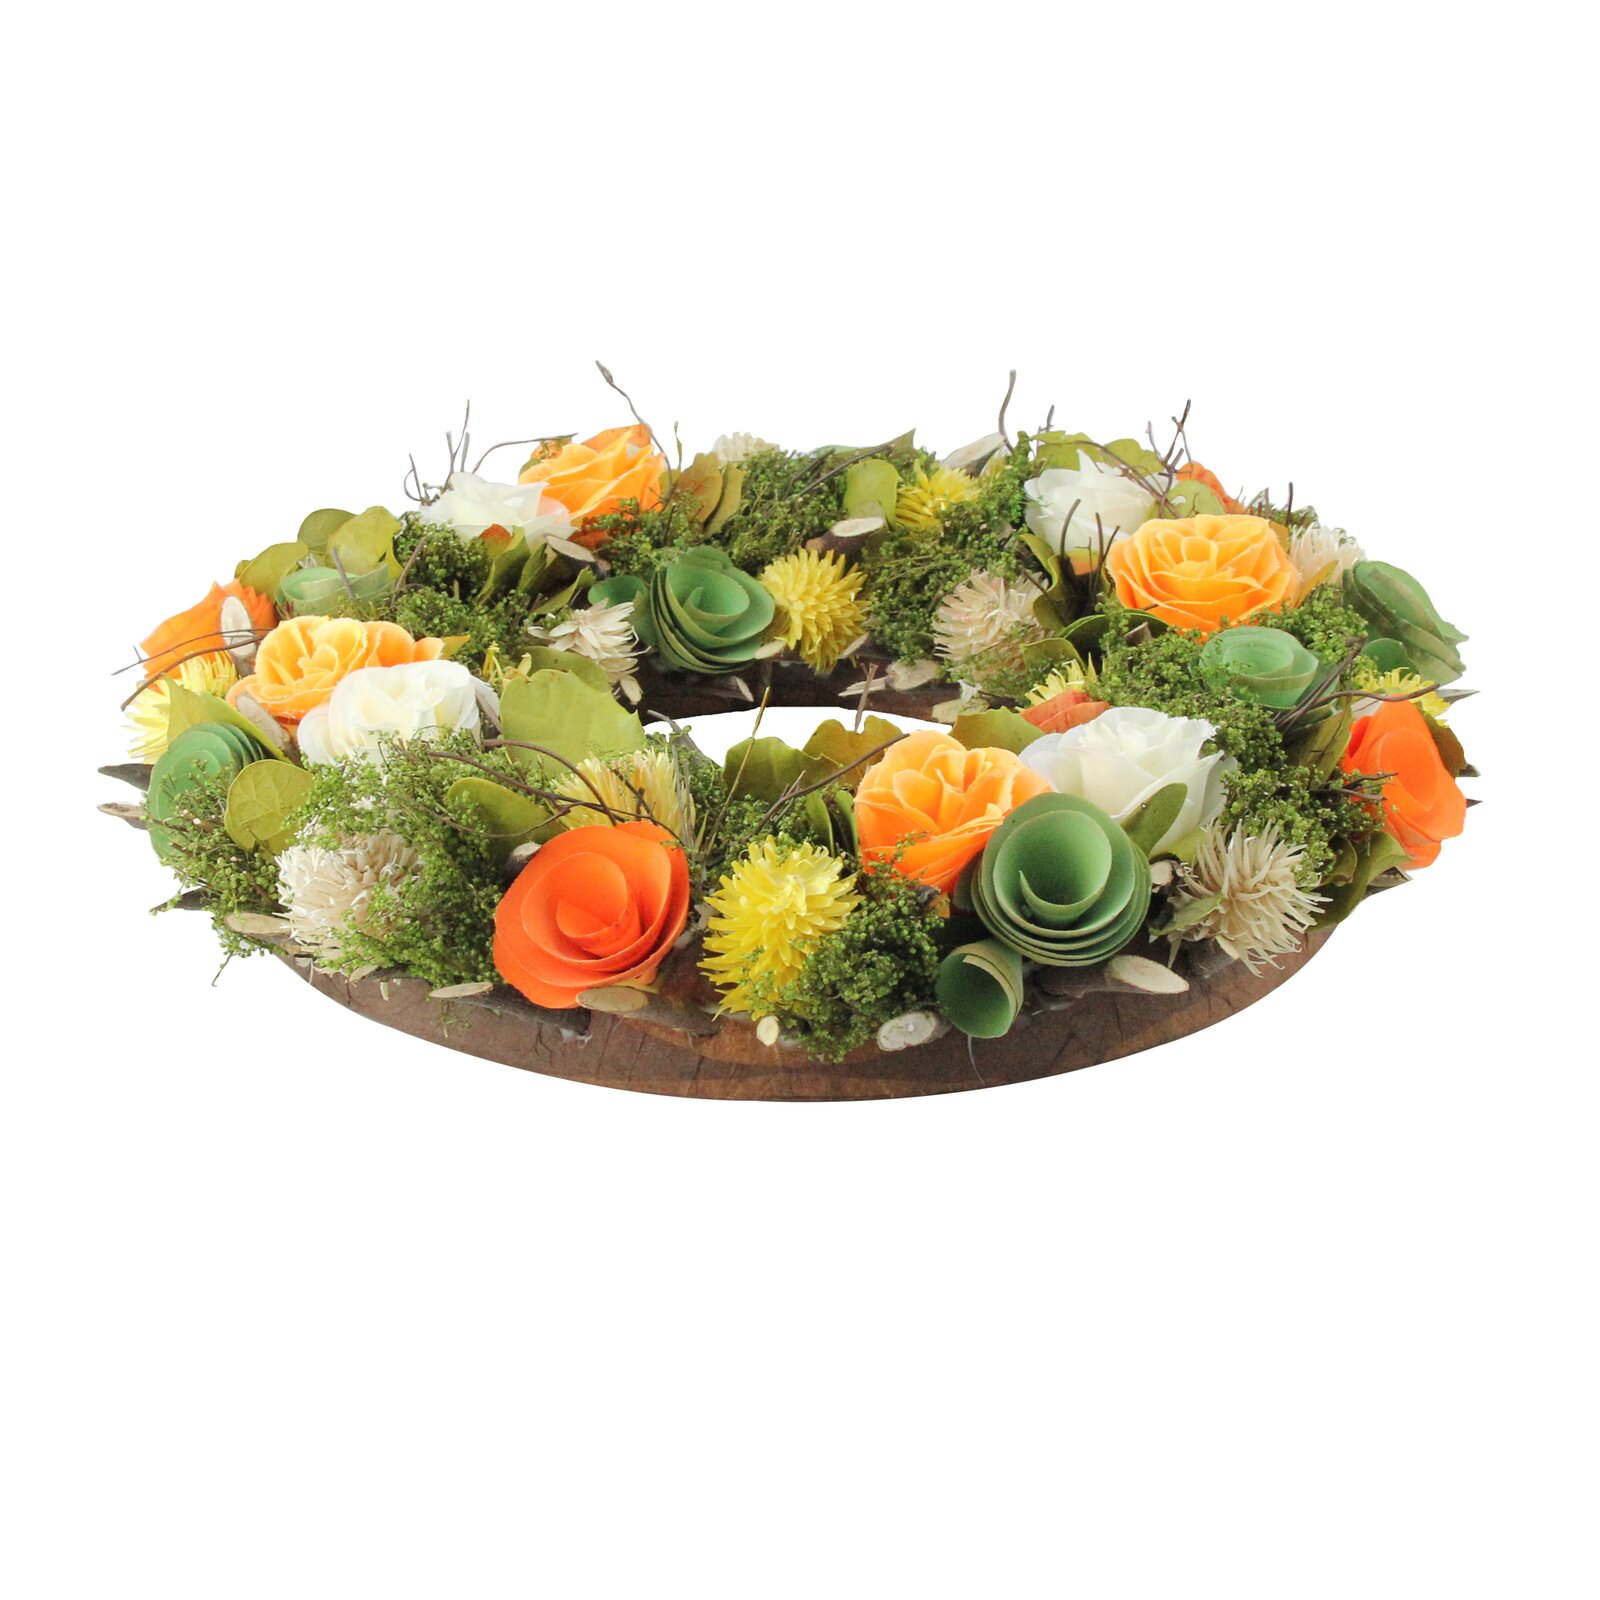 Northlight Wooden and Dried Floral with Moss and Twigs Spring Wreath 12-inch & Reviews